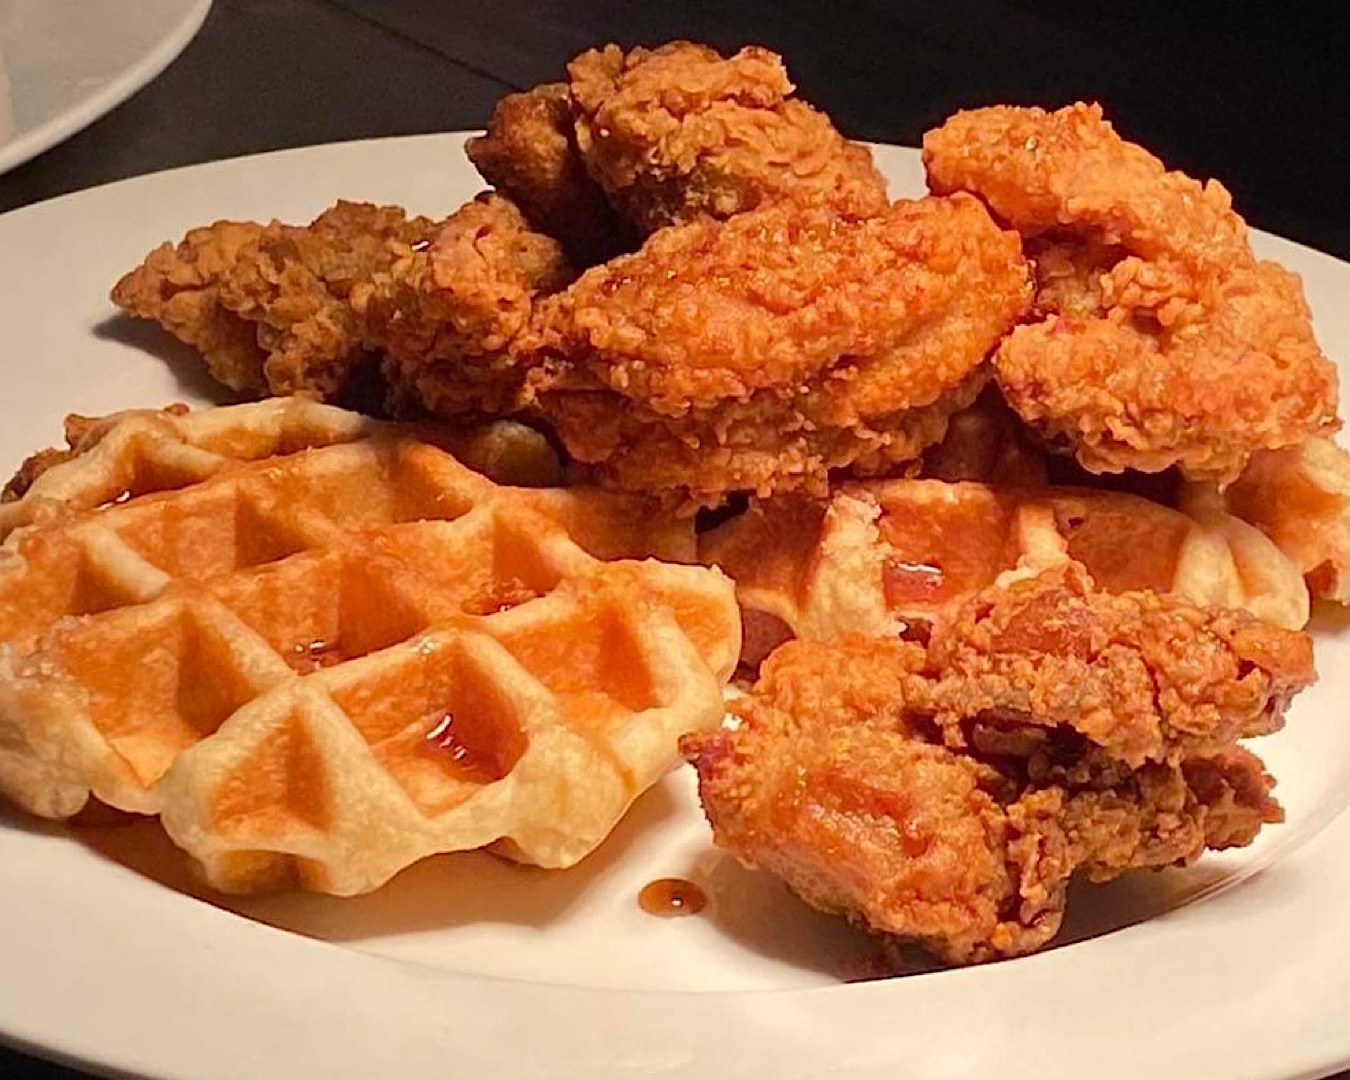 Waffles and crispy fried chicken with maple syrup on a white plate at Sweat Shop and Brew Kitchen’s bottomless fried chicken and waffles.